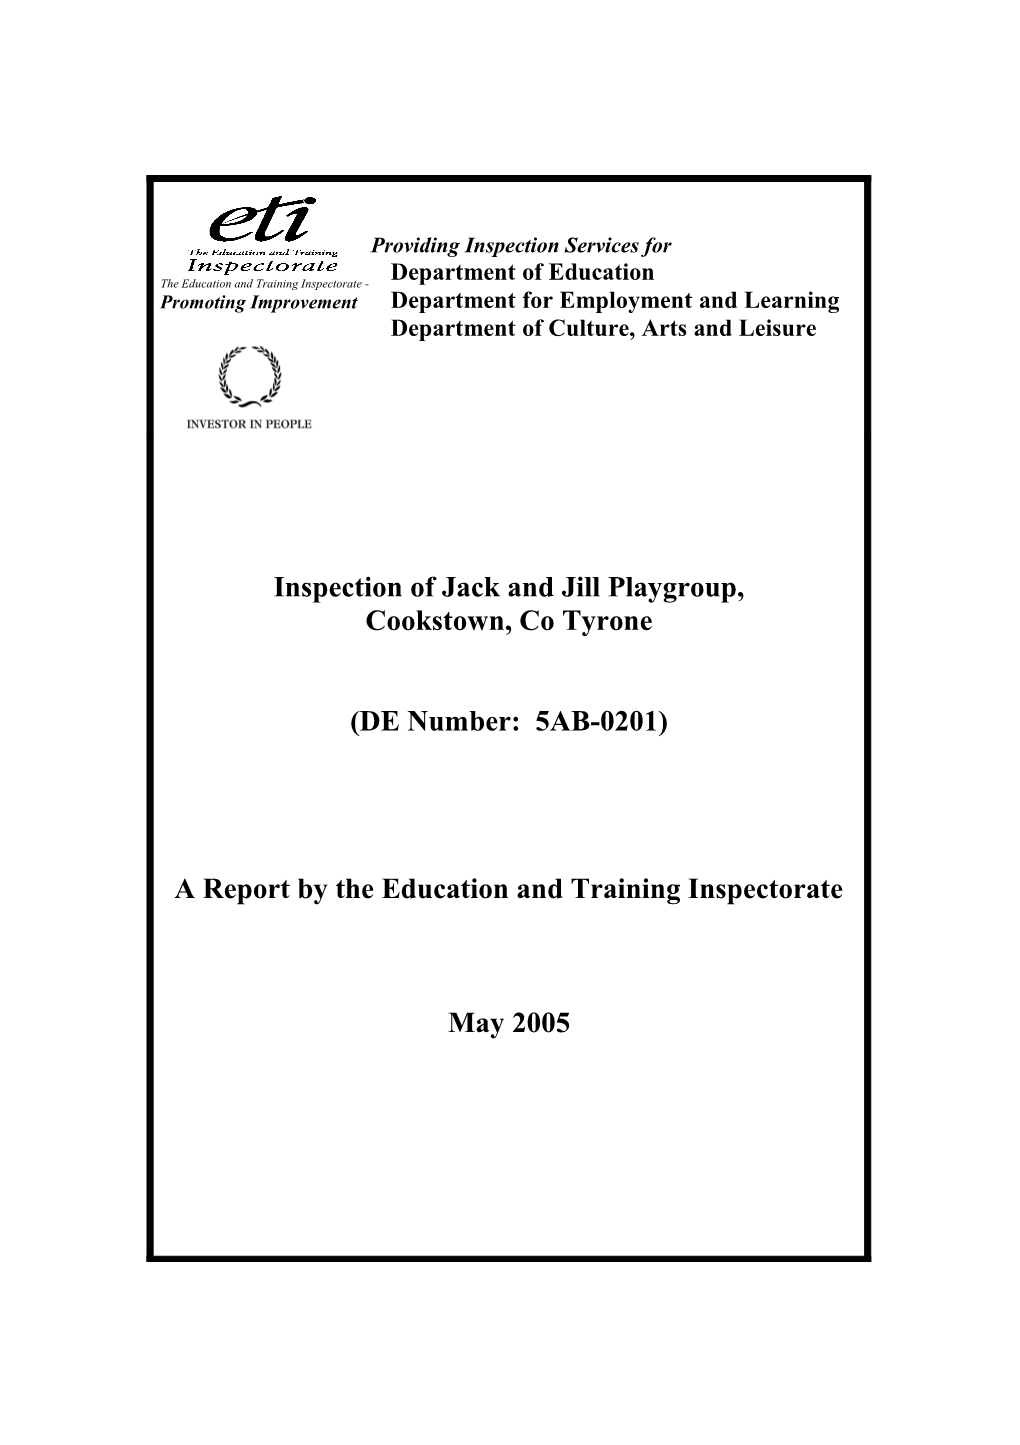 Report on the Inspection of Jack and Jill Playgroup, Cookstown